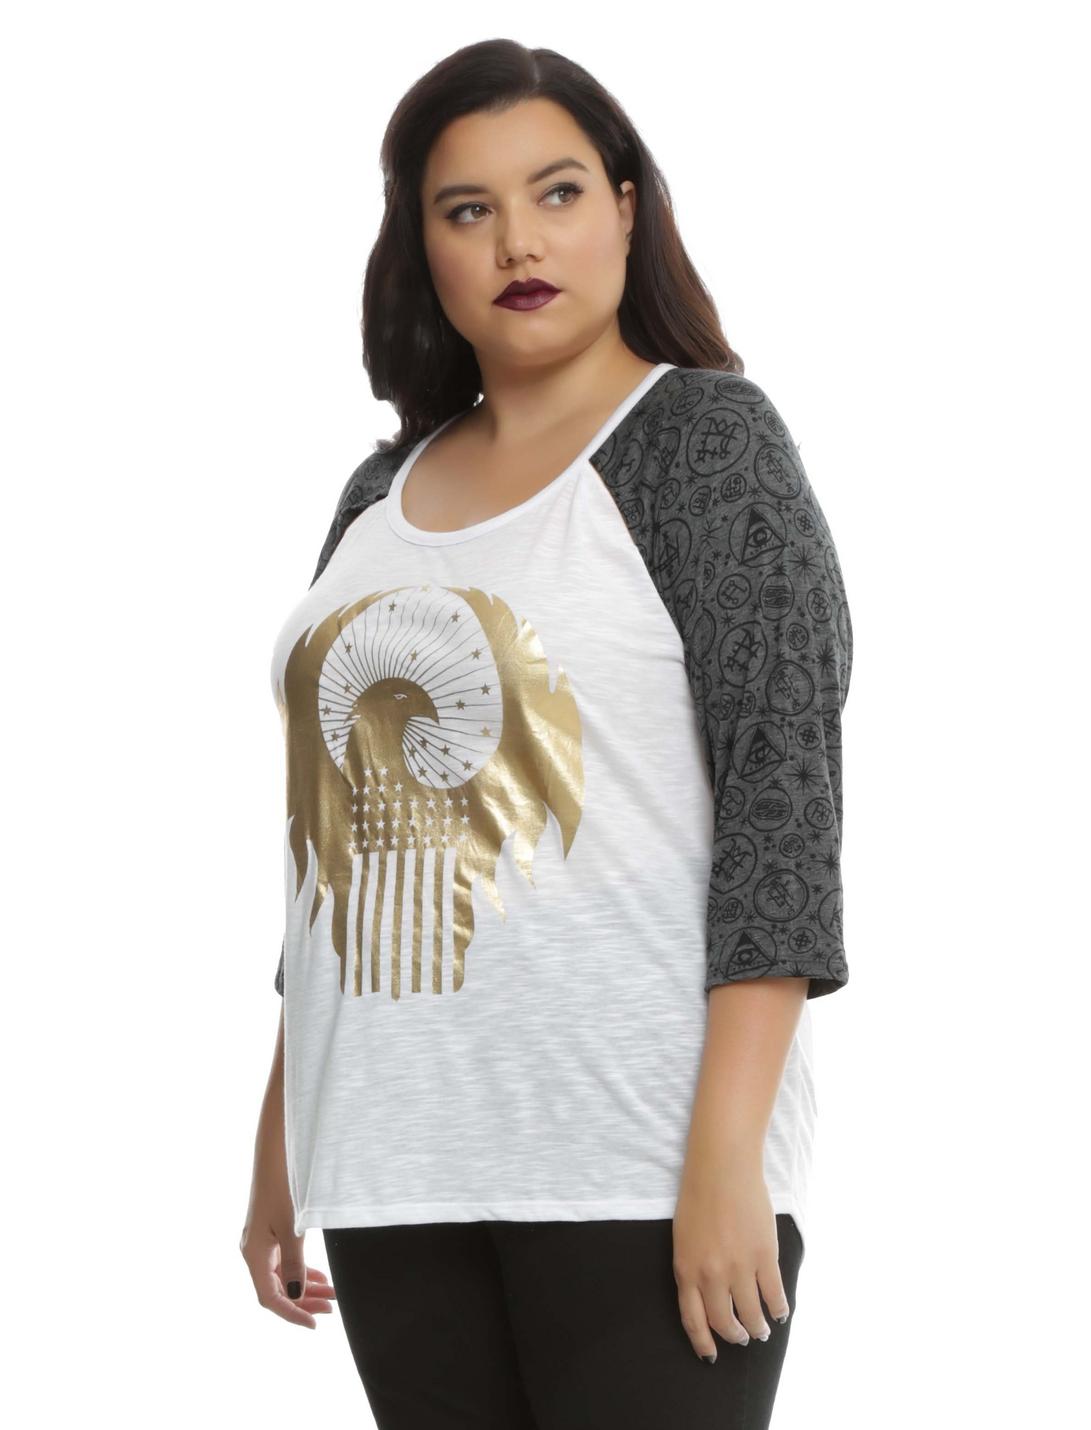 Fantastic Beasts And Where To Find Them Gold Foil MACUSA Crest Girls Raglan Plus Size, WHITE, hi-res